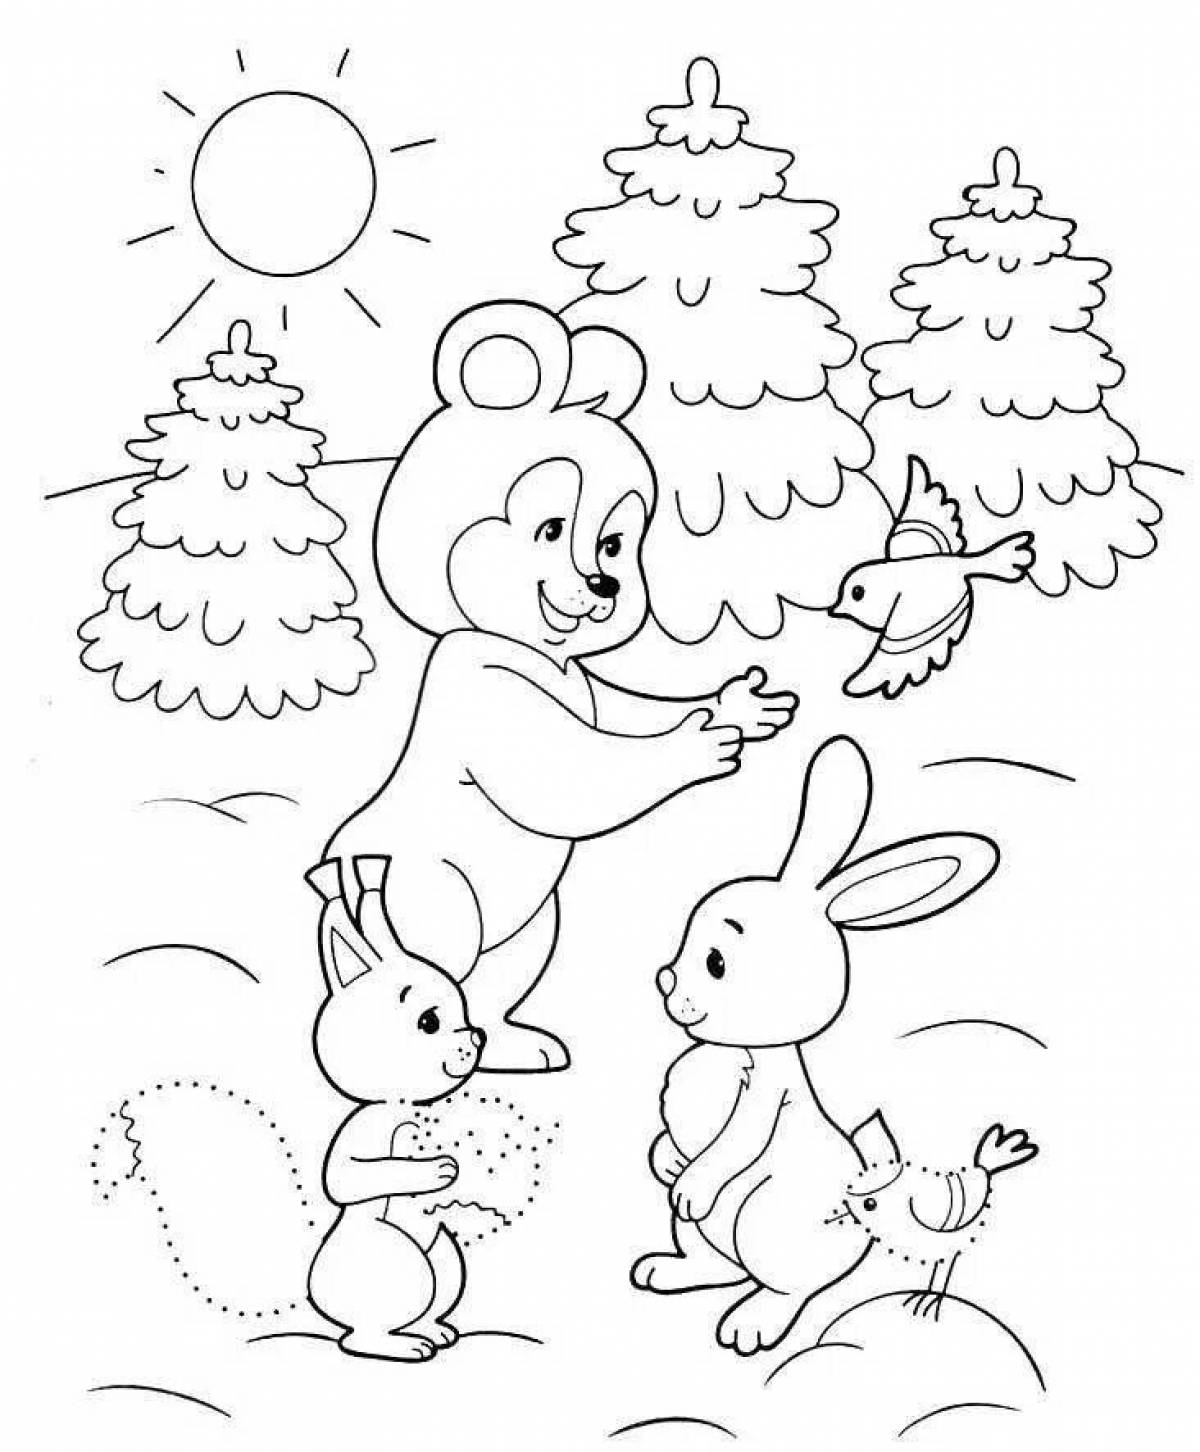 Coloring book beckoning hare for the new year